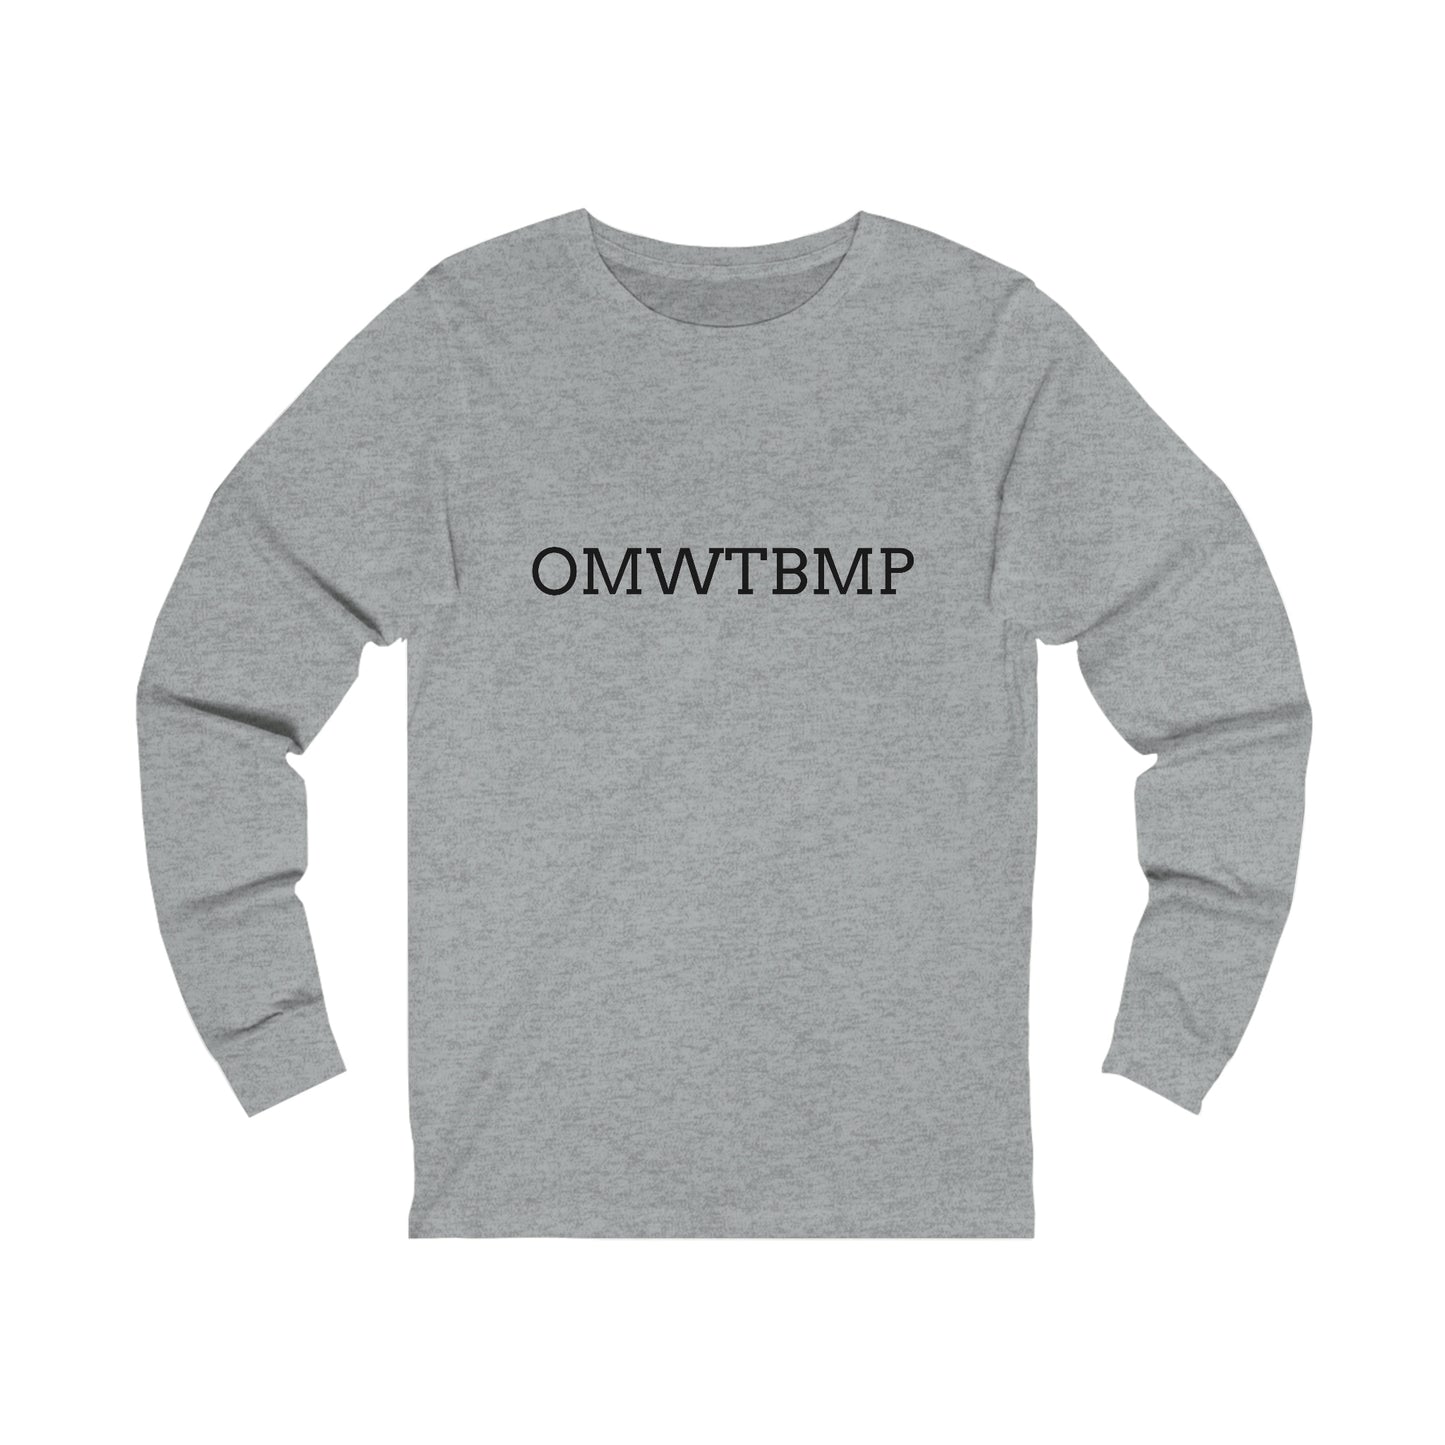 "On My Way To Buy More Plants" Women's Jersey Long Sleeve Tee